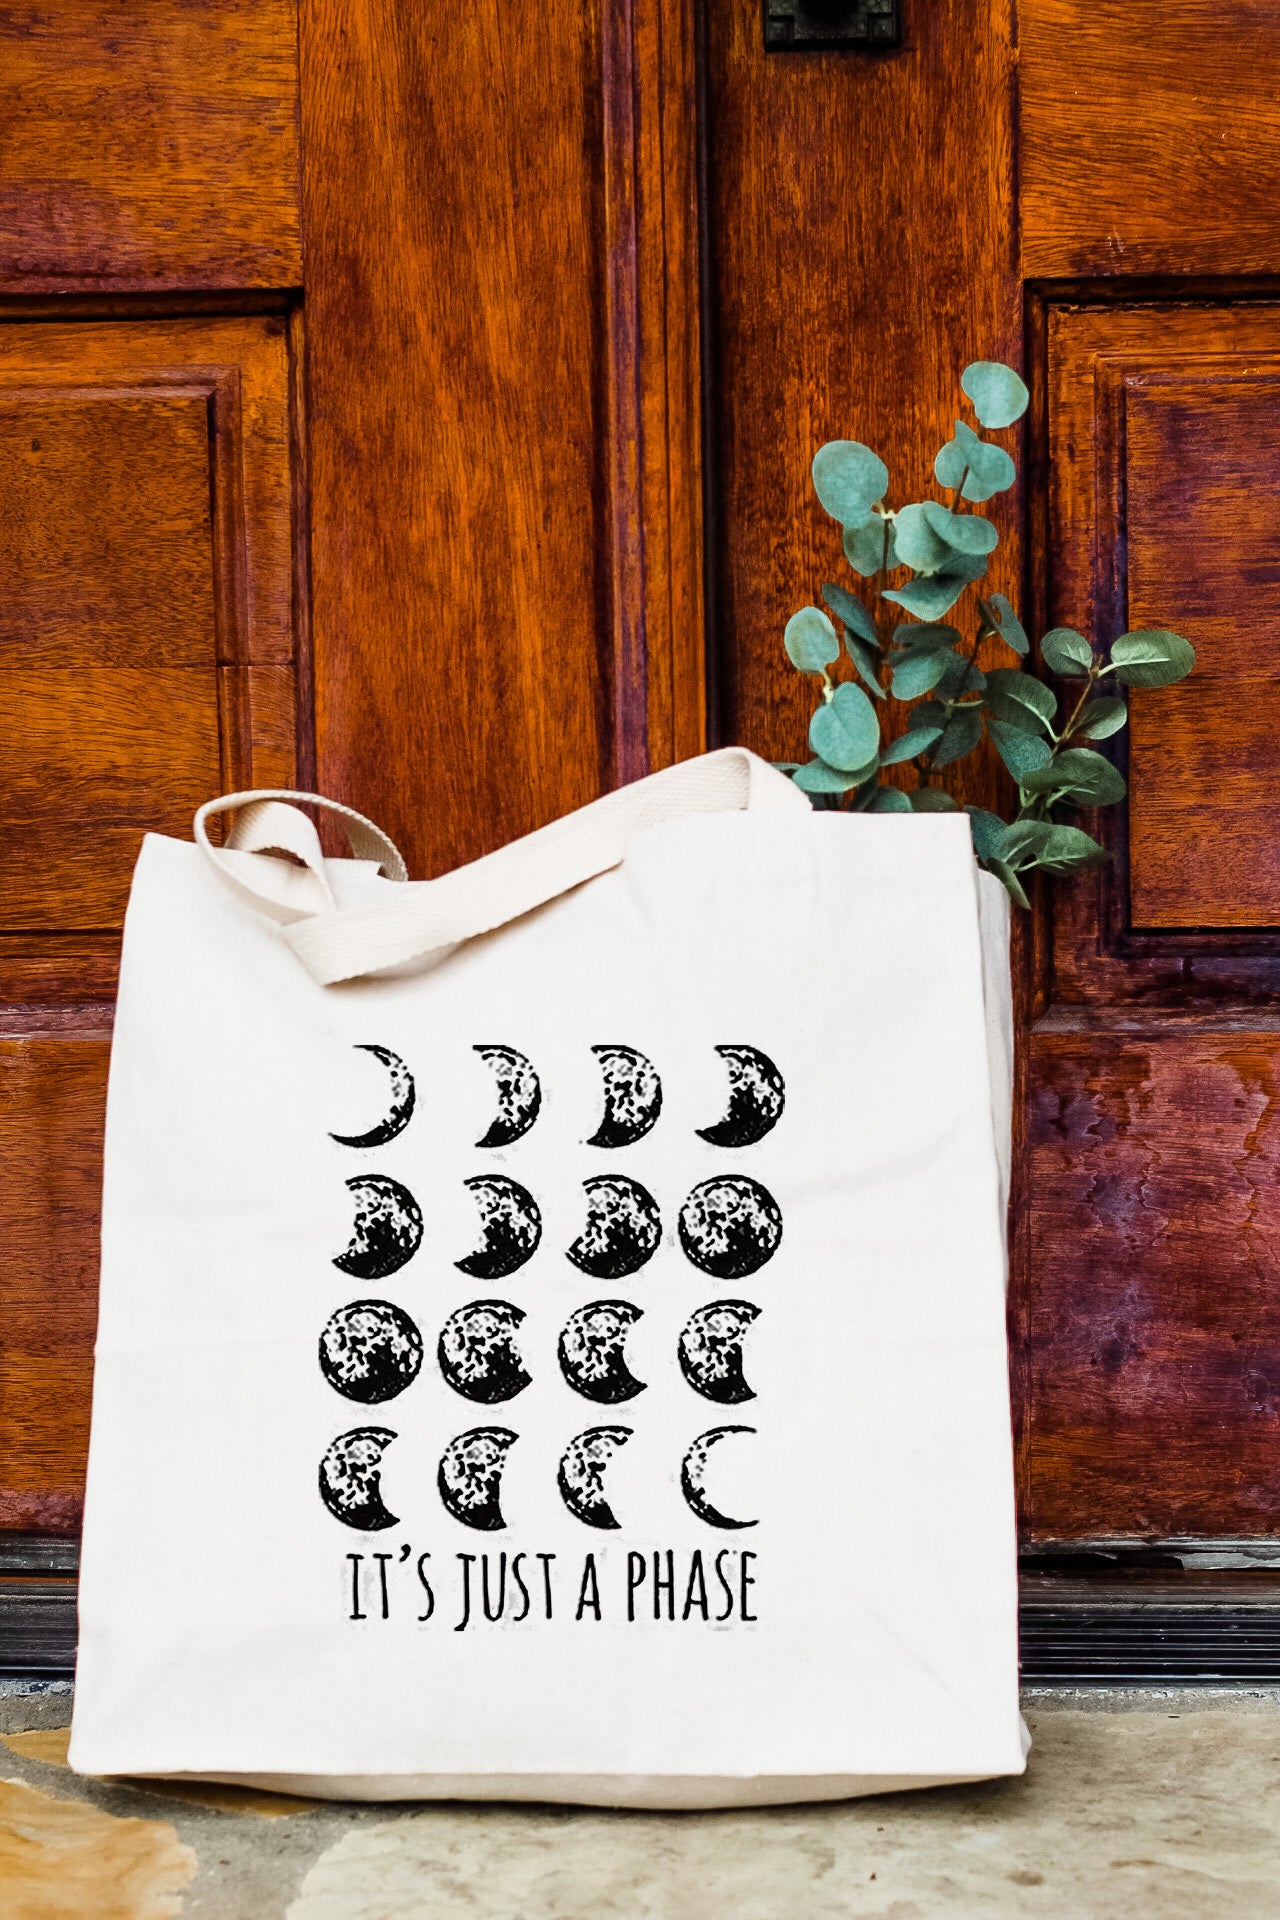 It's Just a Phase, Moon - Tote Bag - MoonlightMakers